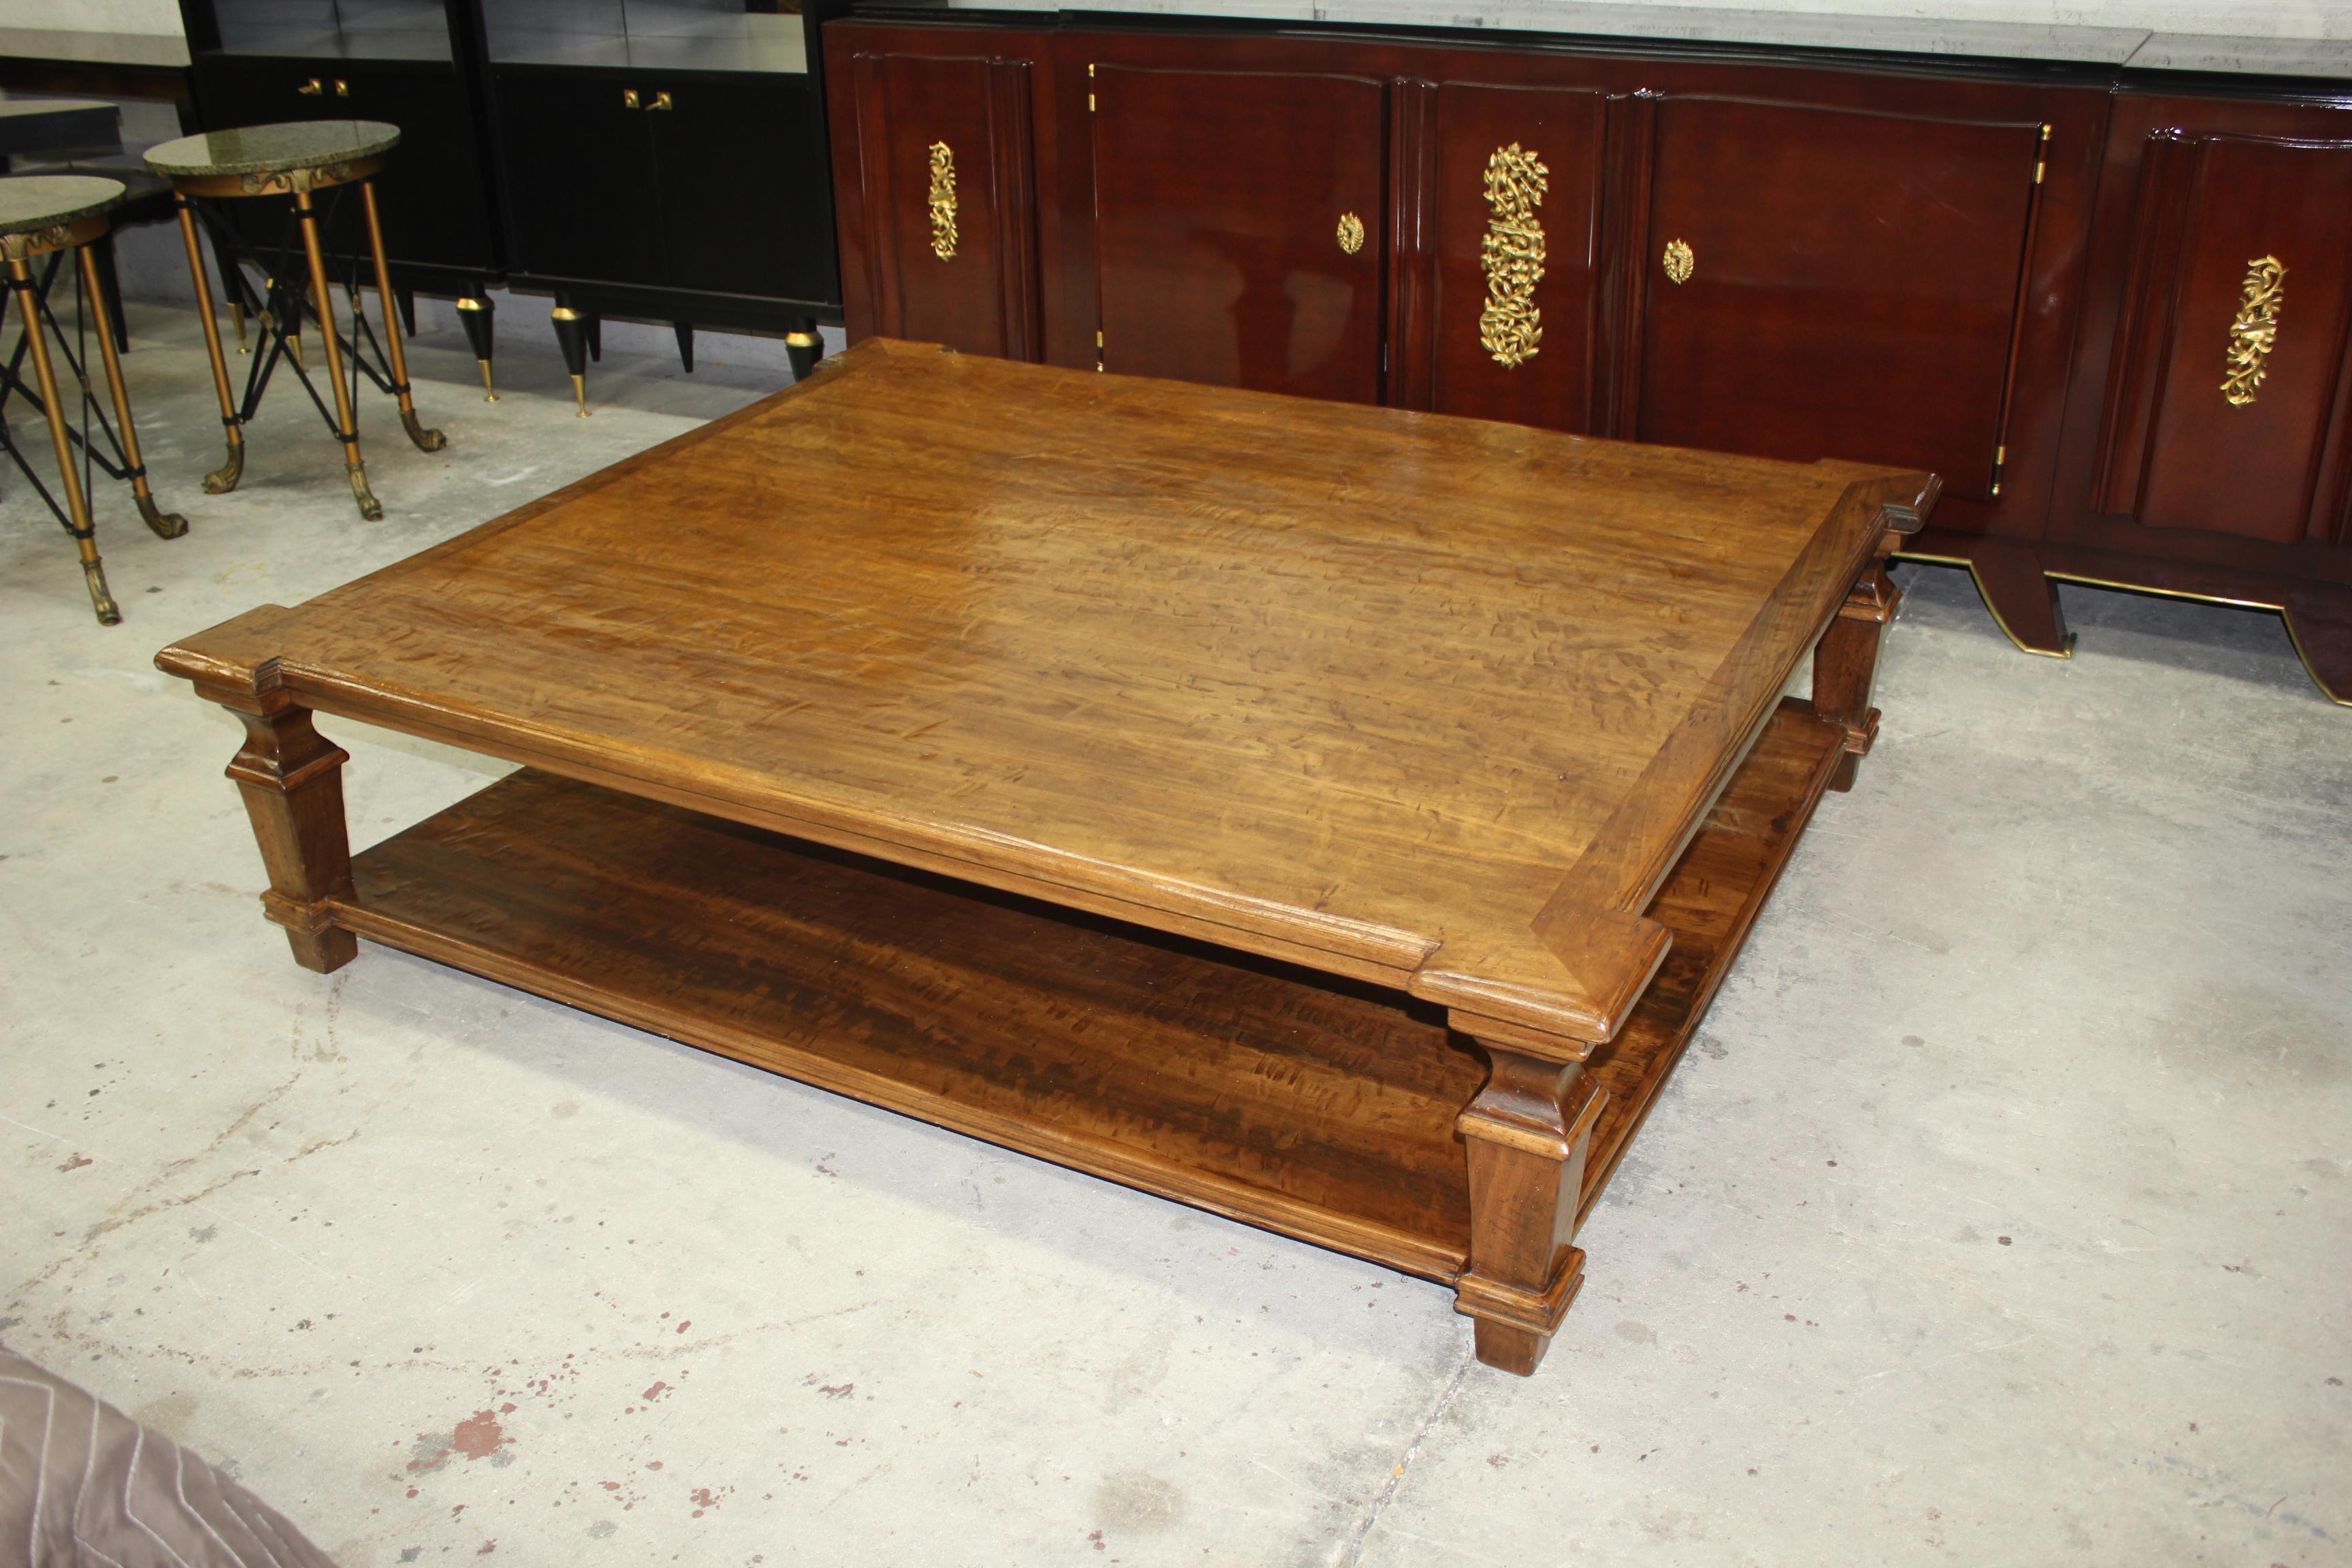 Exceptional huge French country solid walnut coffee table circa 19th century ,handcrafted by talented artisans in the early 1900s from Lyon, the coffee table have four beautiful legs with bottom shelf in same country walnut as top. We traveled to